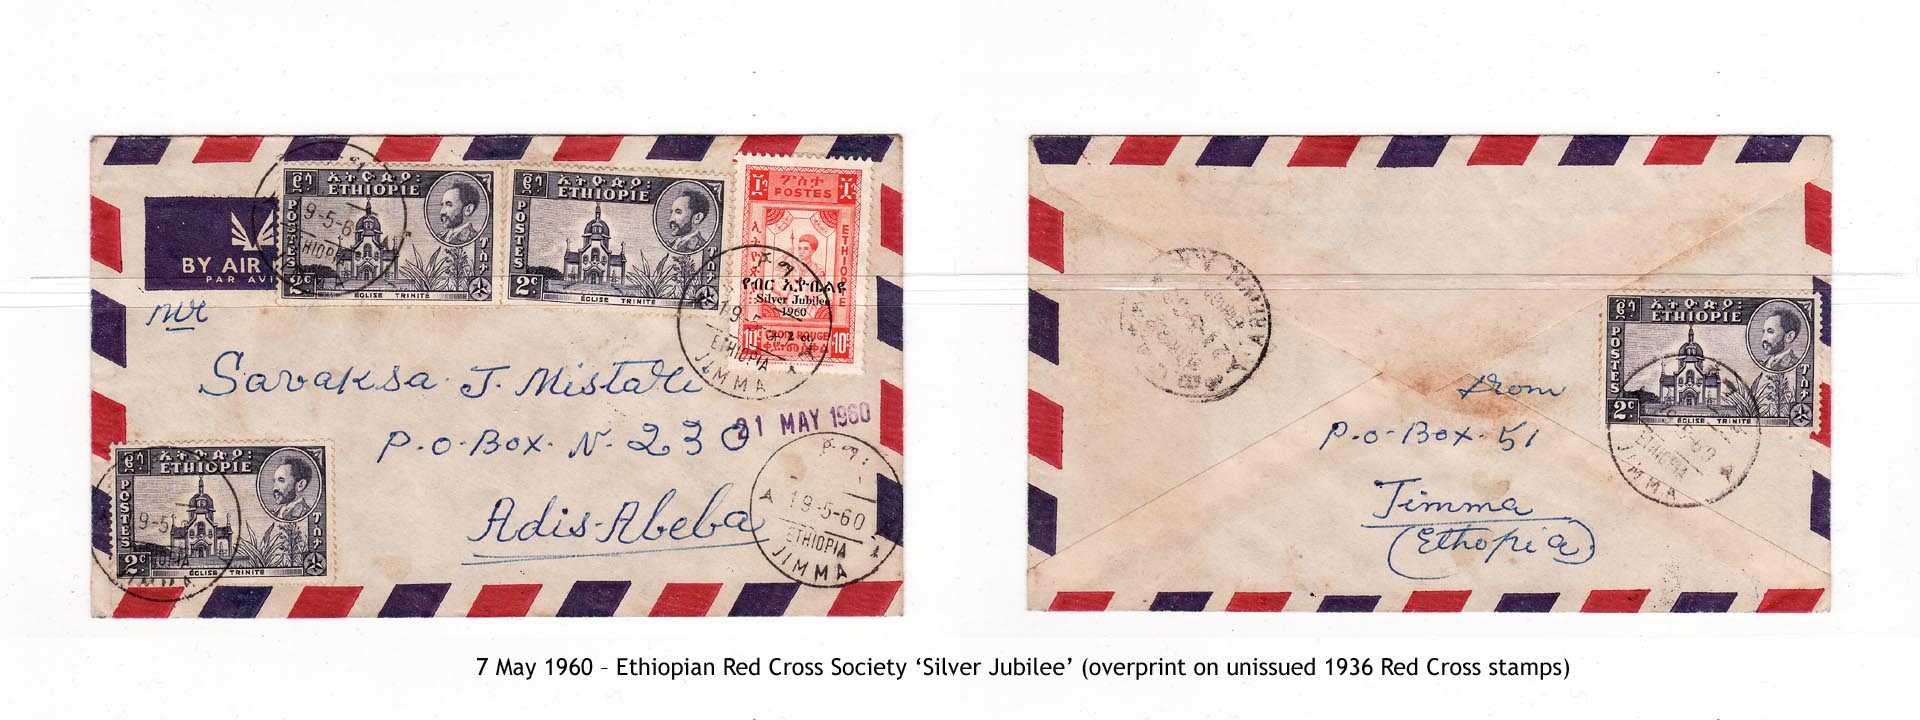 19600507 – Ethiopian Red Cross Society ‘Silver Jubilee’ (overprint on unissued 1936 Red Cross stamps)